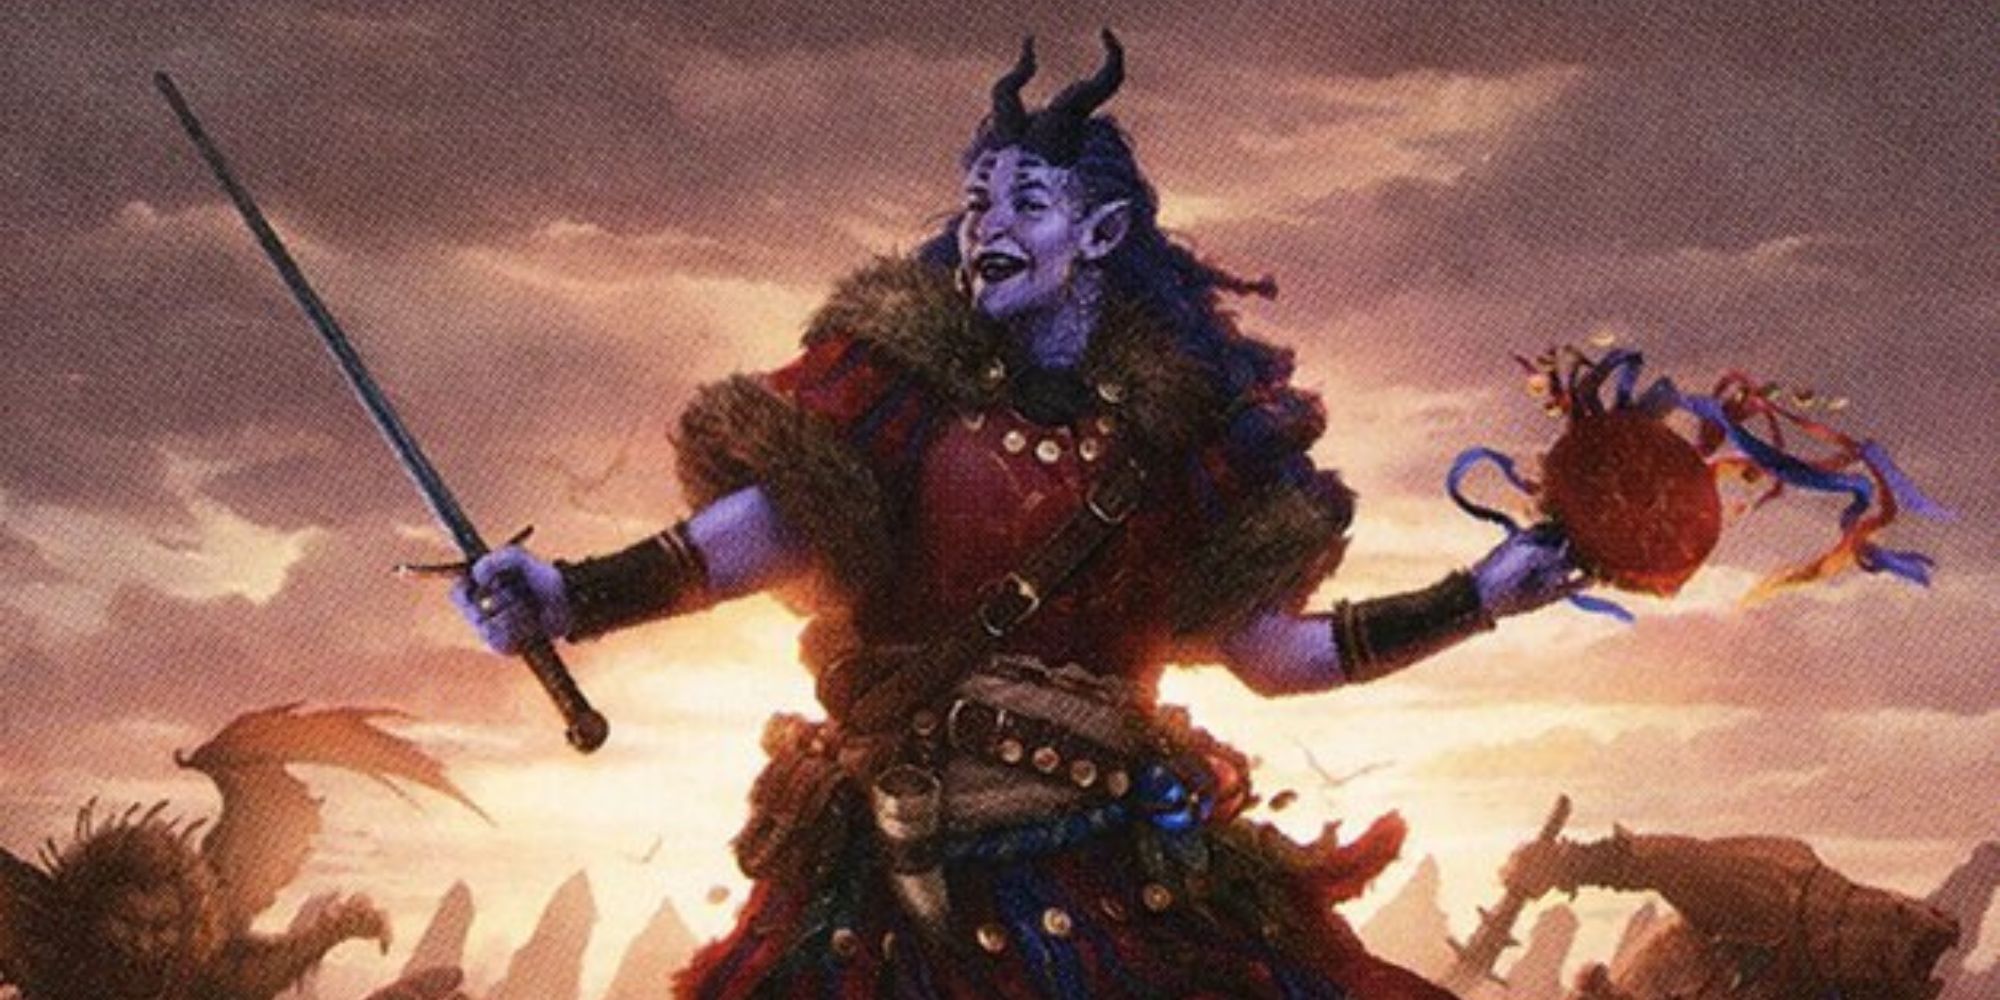 A tiefling with purple skin on a battlefield. She has a sword in her left hand and a tambourine in her right.